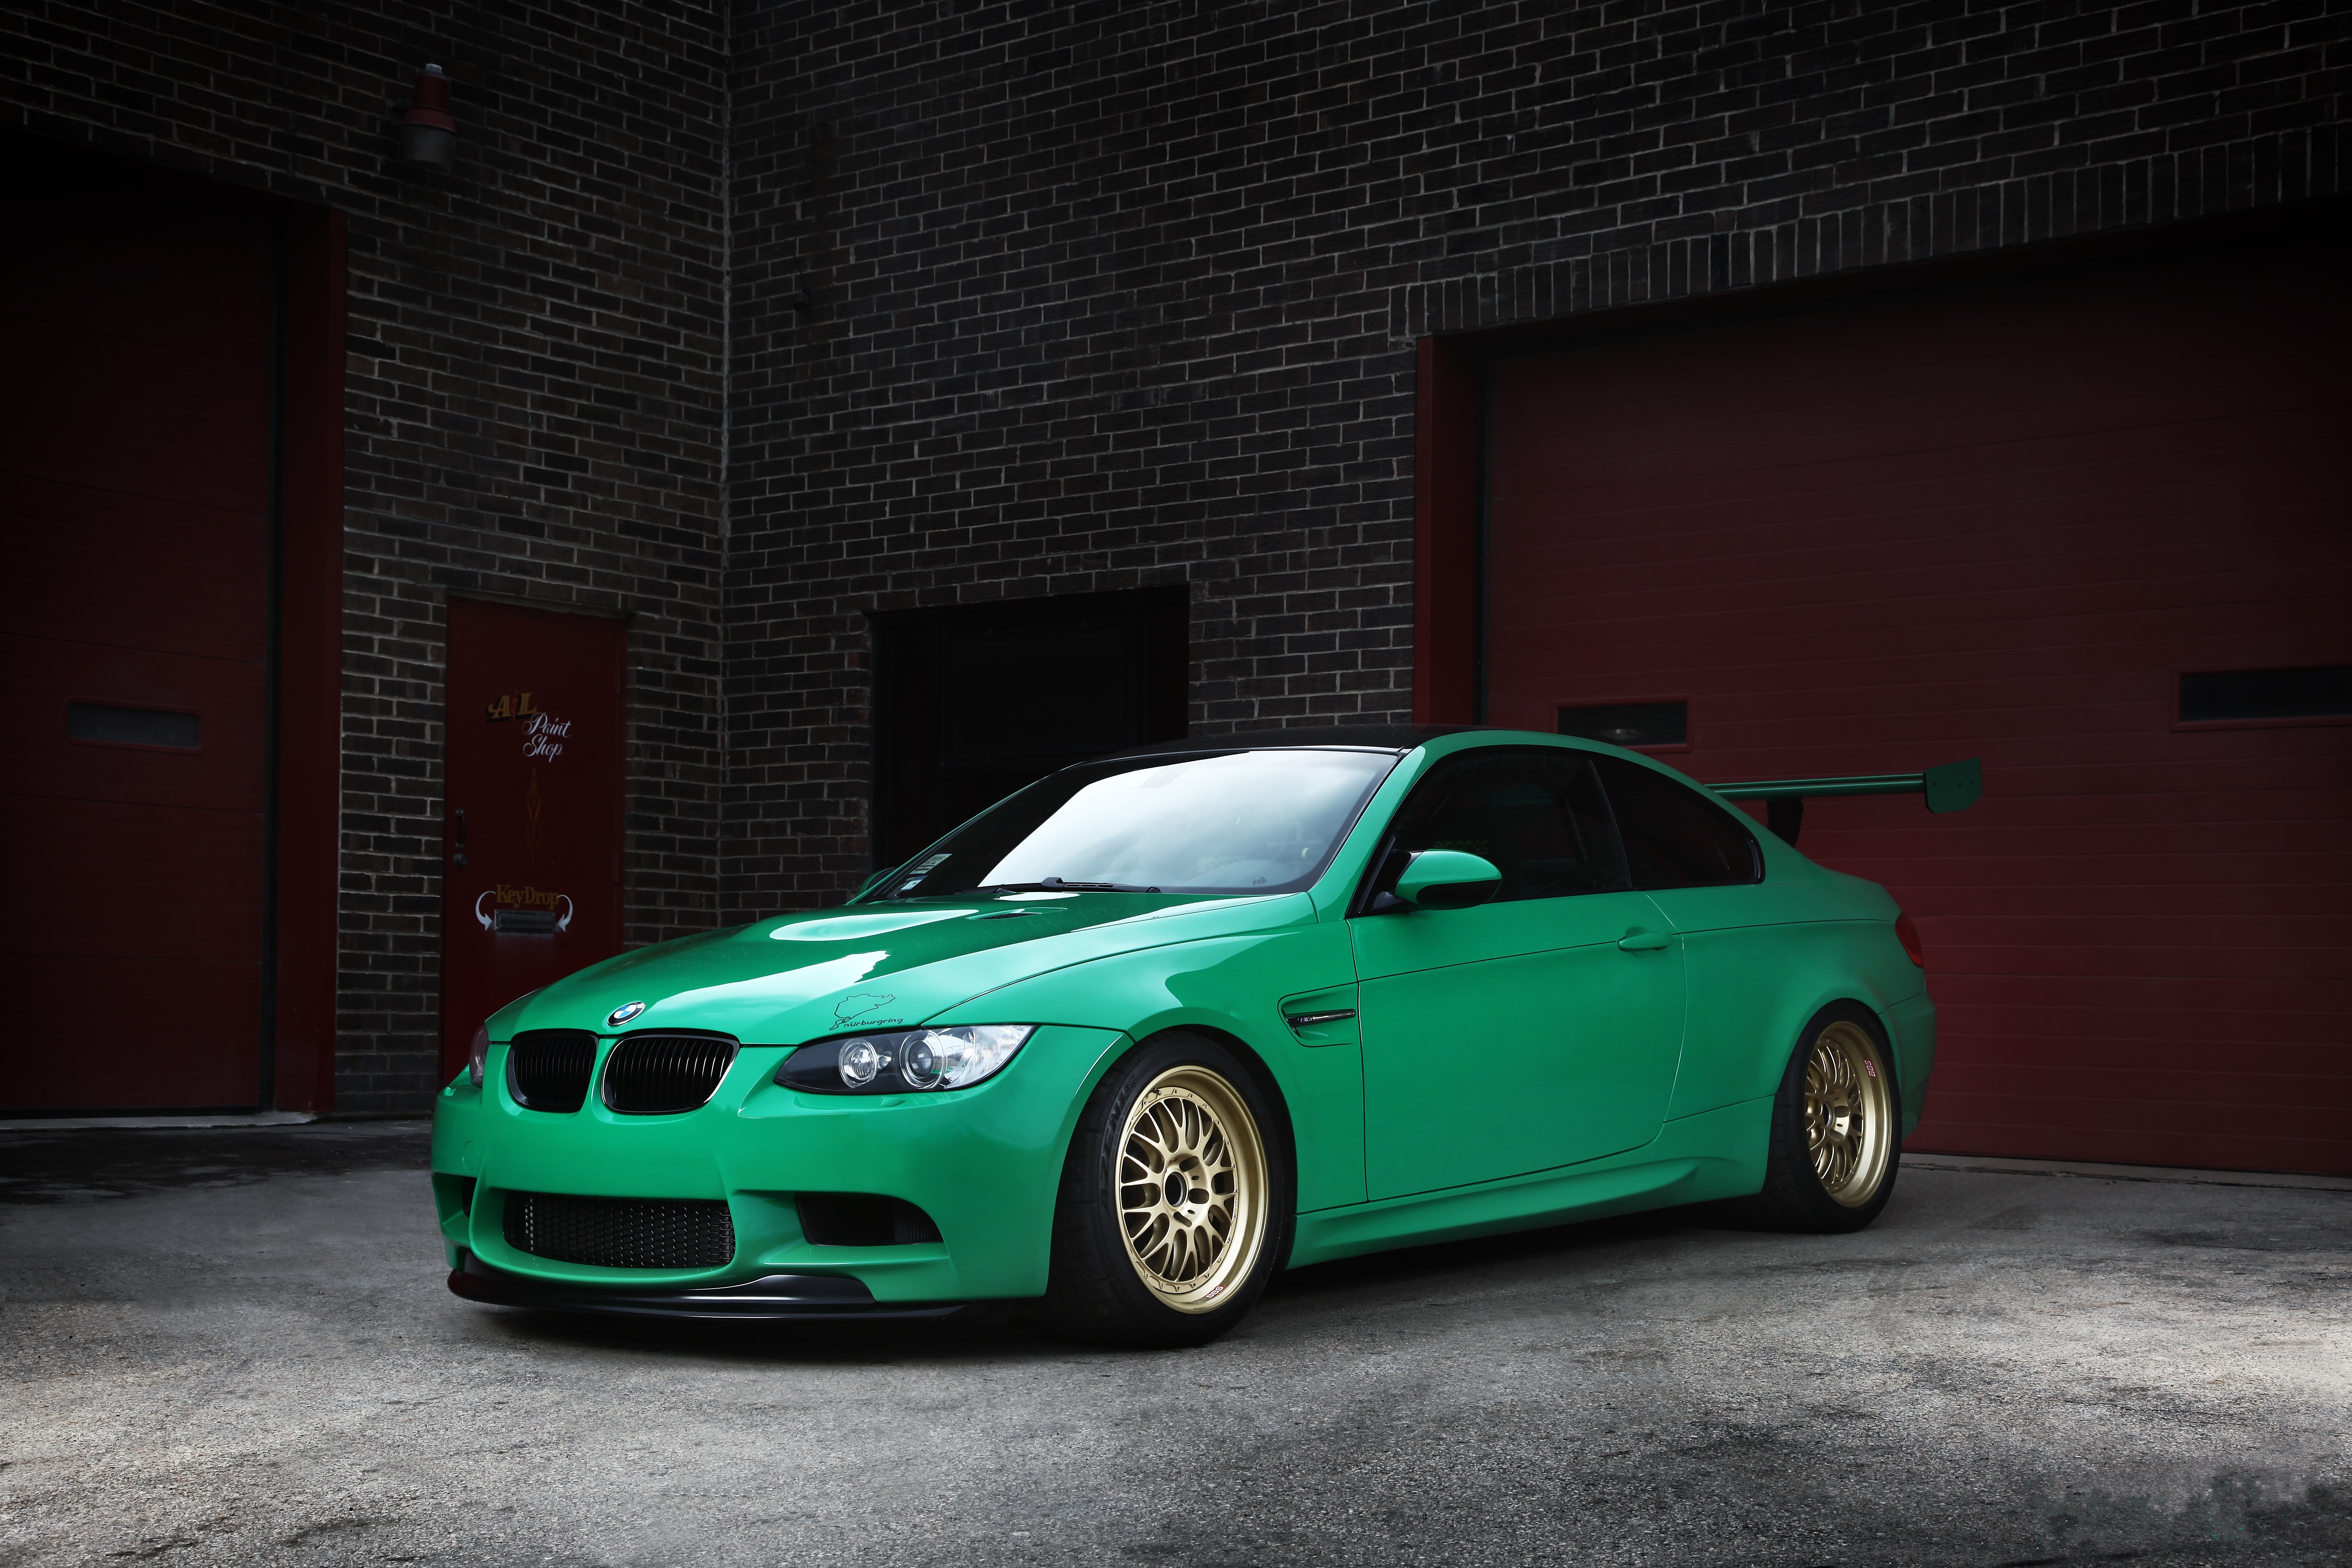 97555 download wallpaper bmw, cars, green, wing, m3, wheels, e92, gate, goal, brick walls screensavers and pictures for free